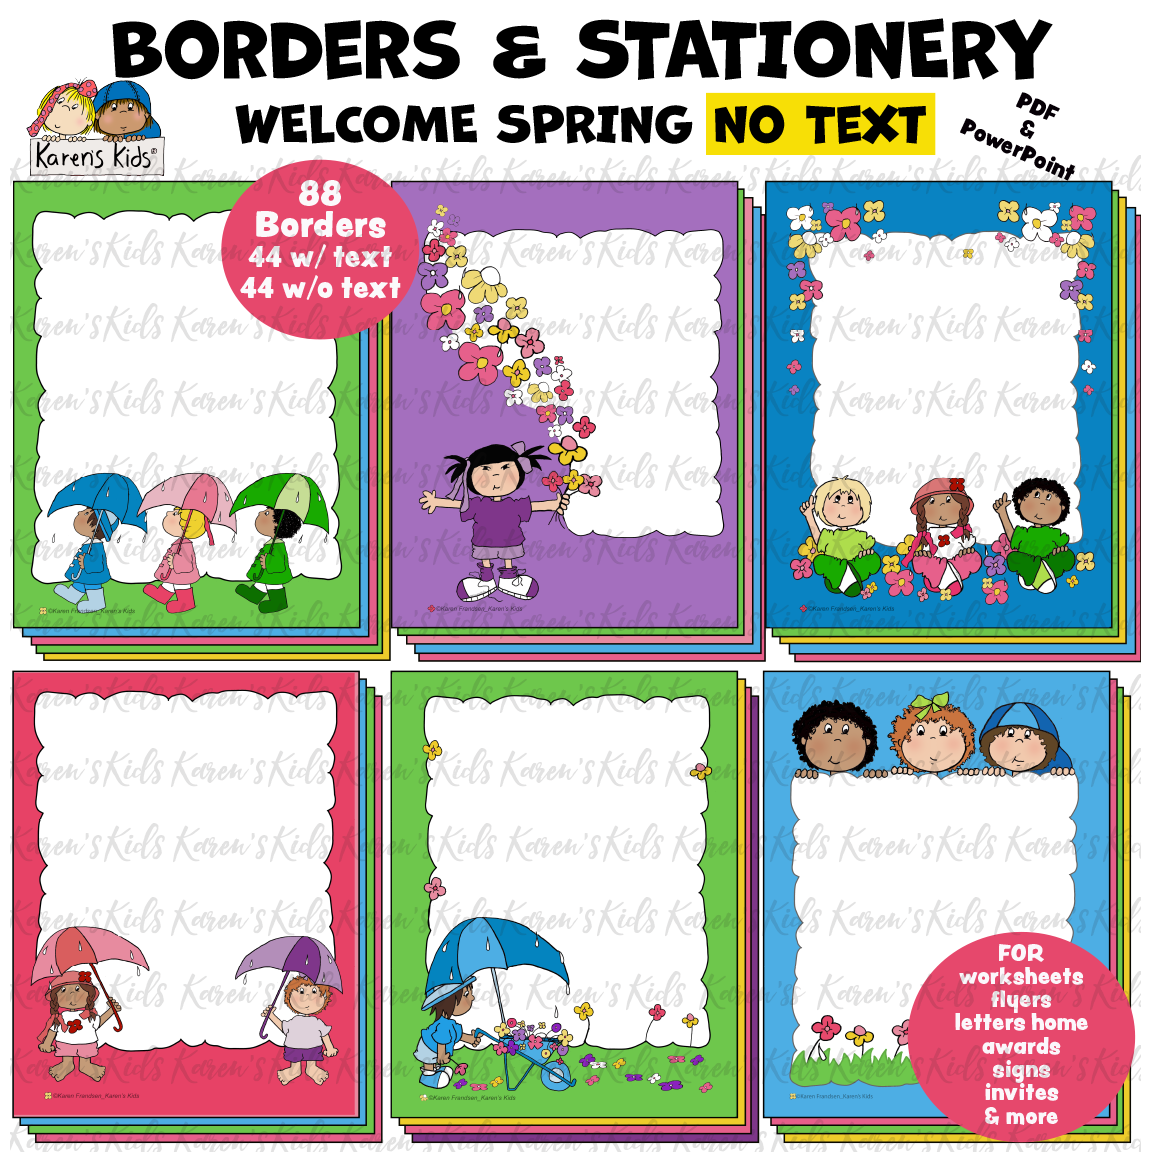 Title reads BORDERS AND STATIONERY, WELCOME SPRING, NO TEXT. PDF and PowerPoint.  88 Borders 44 with text, 44 without text. 6 samples, green borders with 3 kids, umbrellas, purple border with flowers and girl, blue borders with flowers and 3 kids, and 3 more.